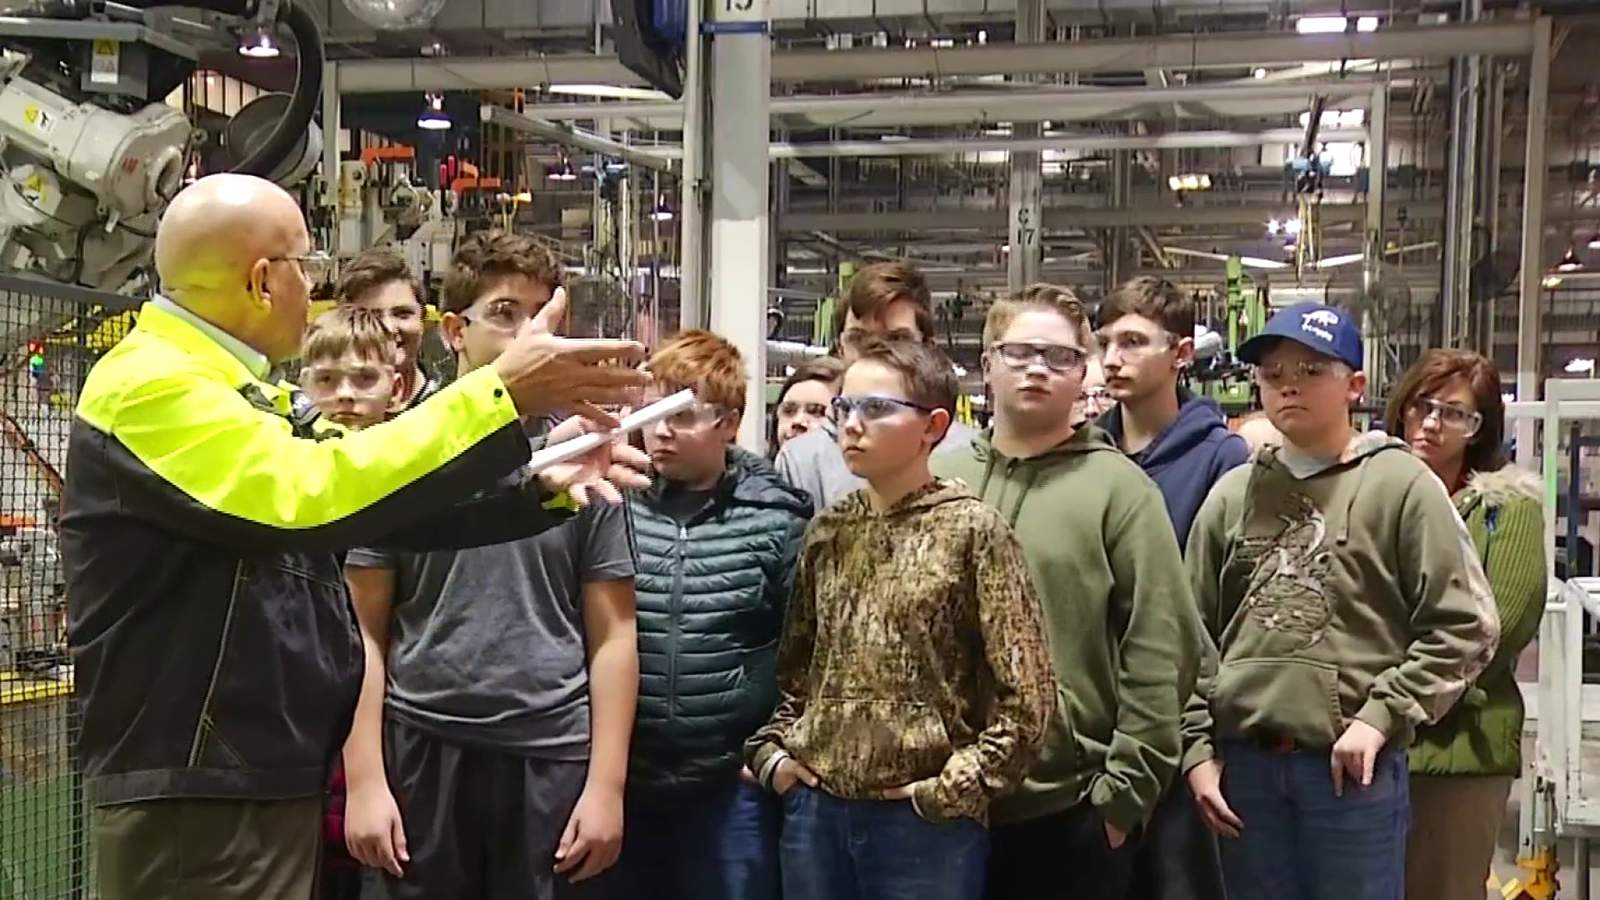 Ups and downs: Students tour Volvo plant as both layoffs and expansion continue